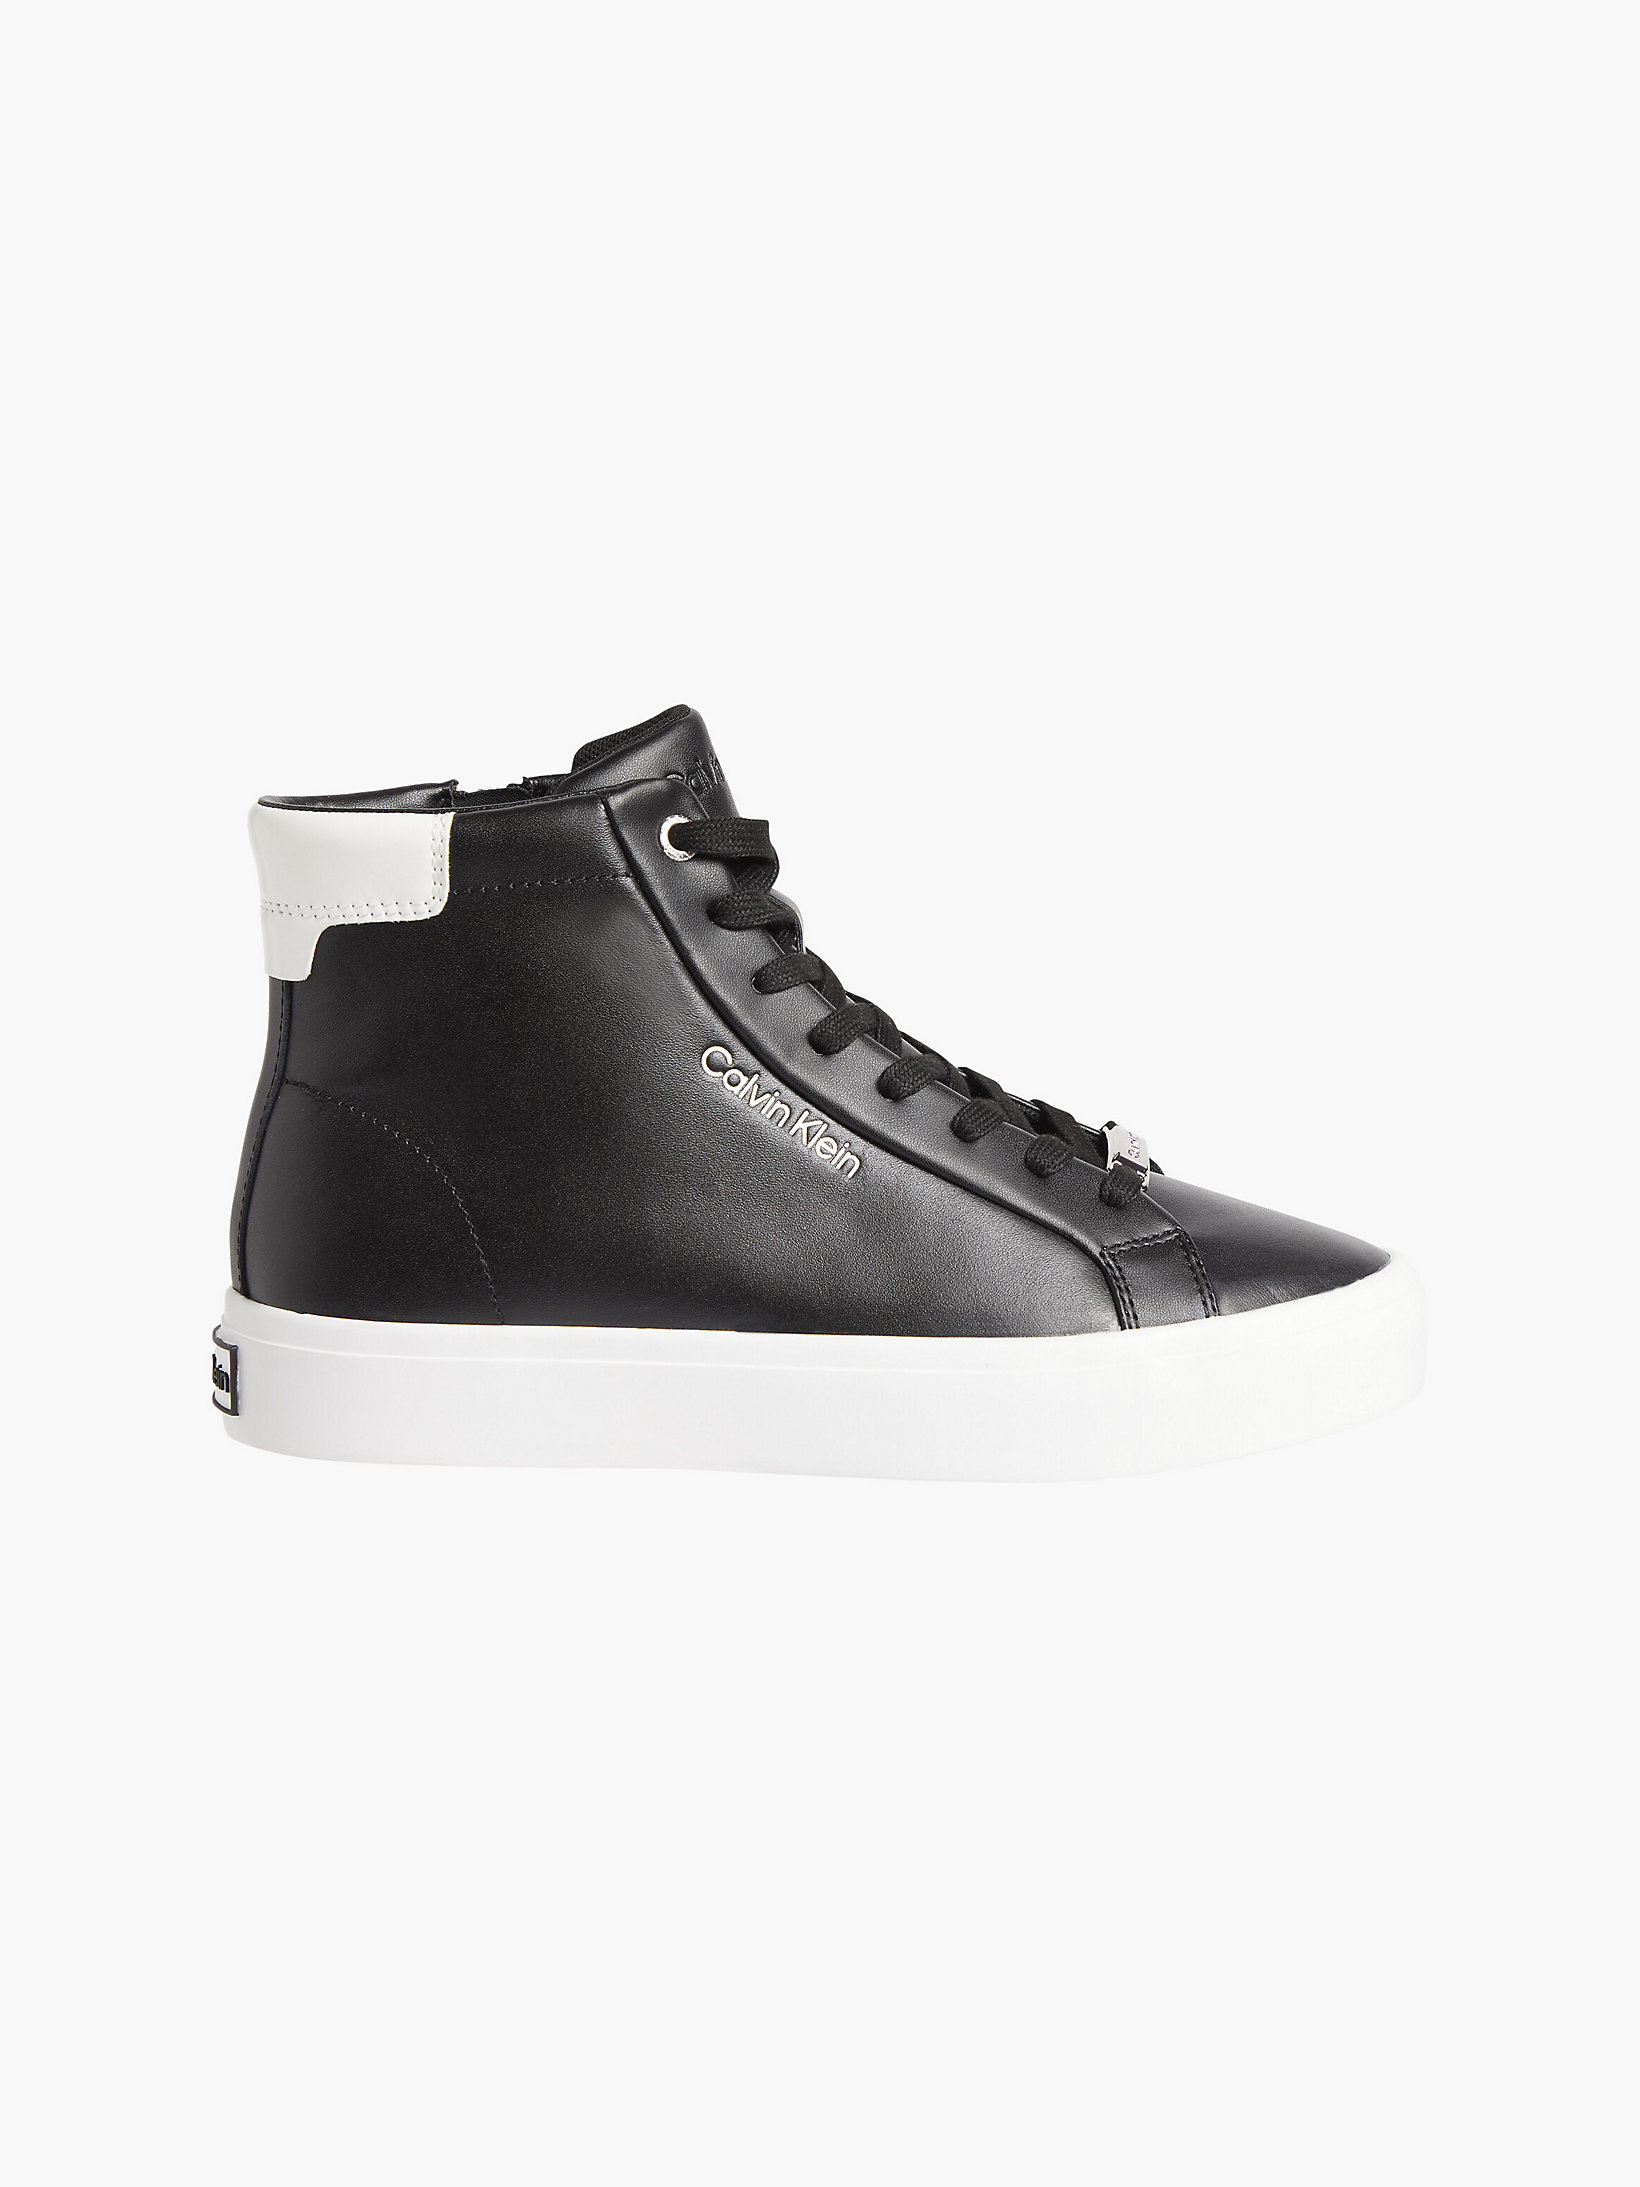 Apepazza Leather Trainers in Black Womens Shoes Trainers High-top trainers 